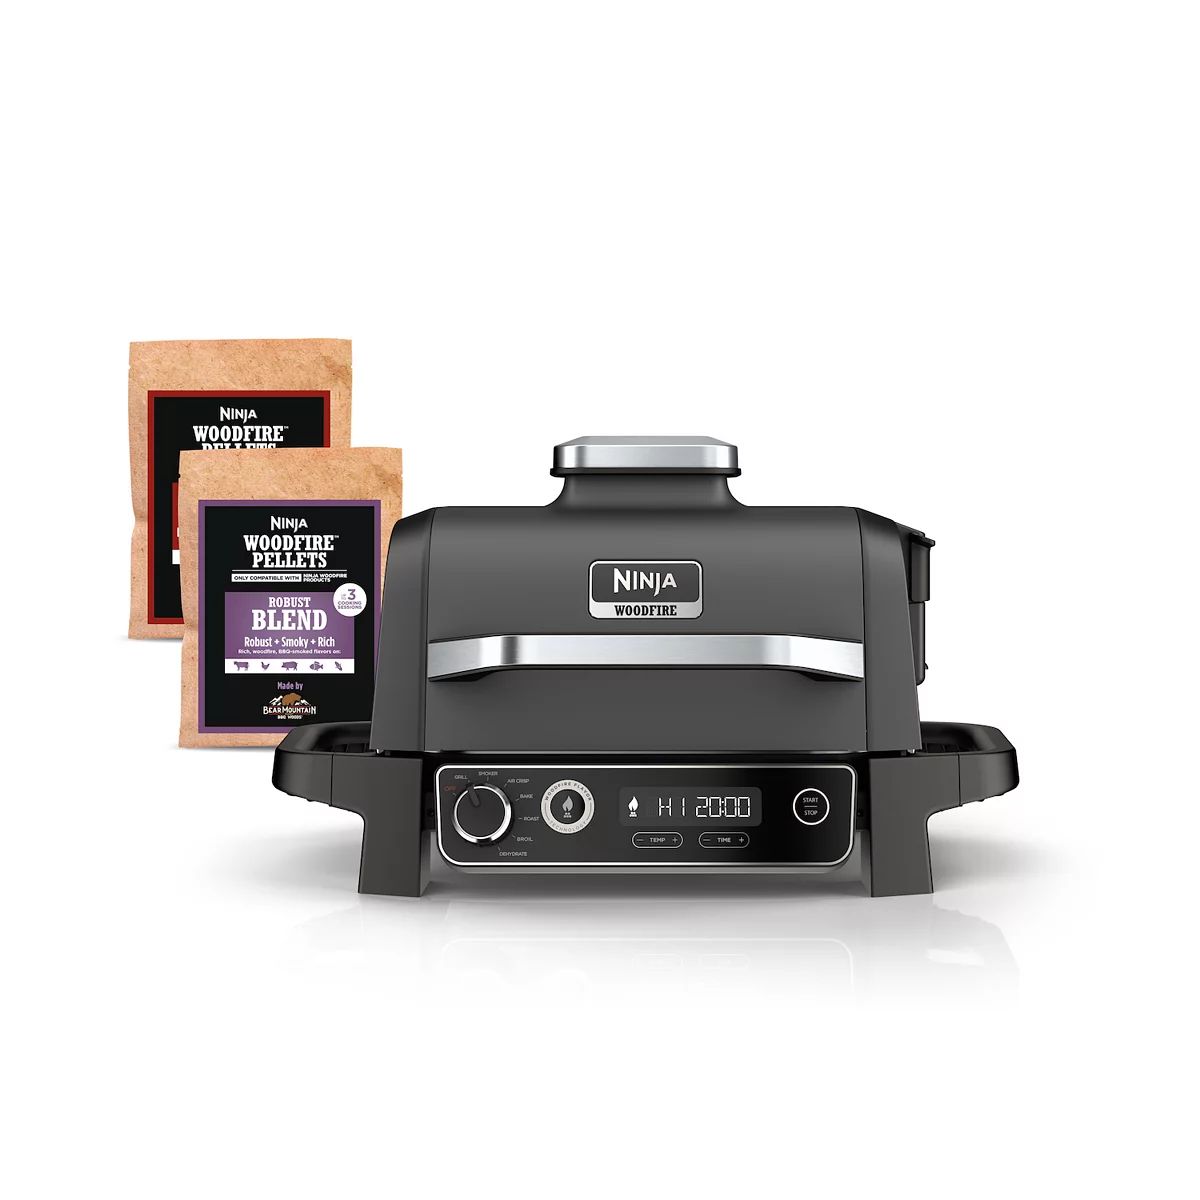 Ninja Woodfire Outdoor Grill, 7-in-1 Master Grill, BBQ Smoker & Air Fryer | Kohl's